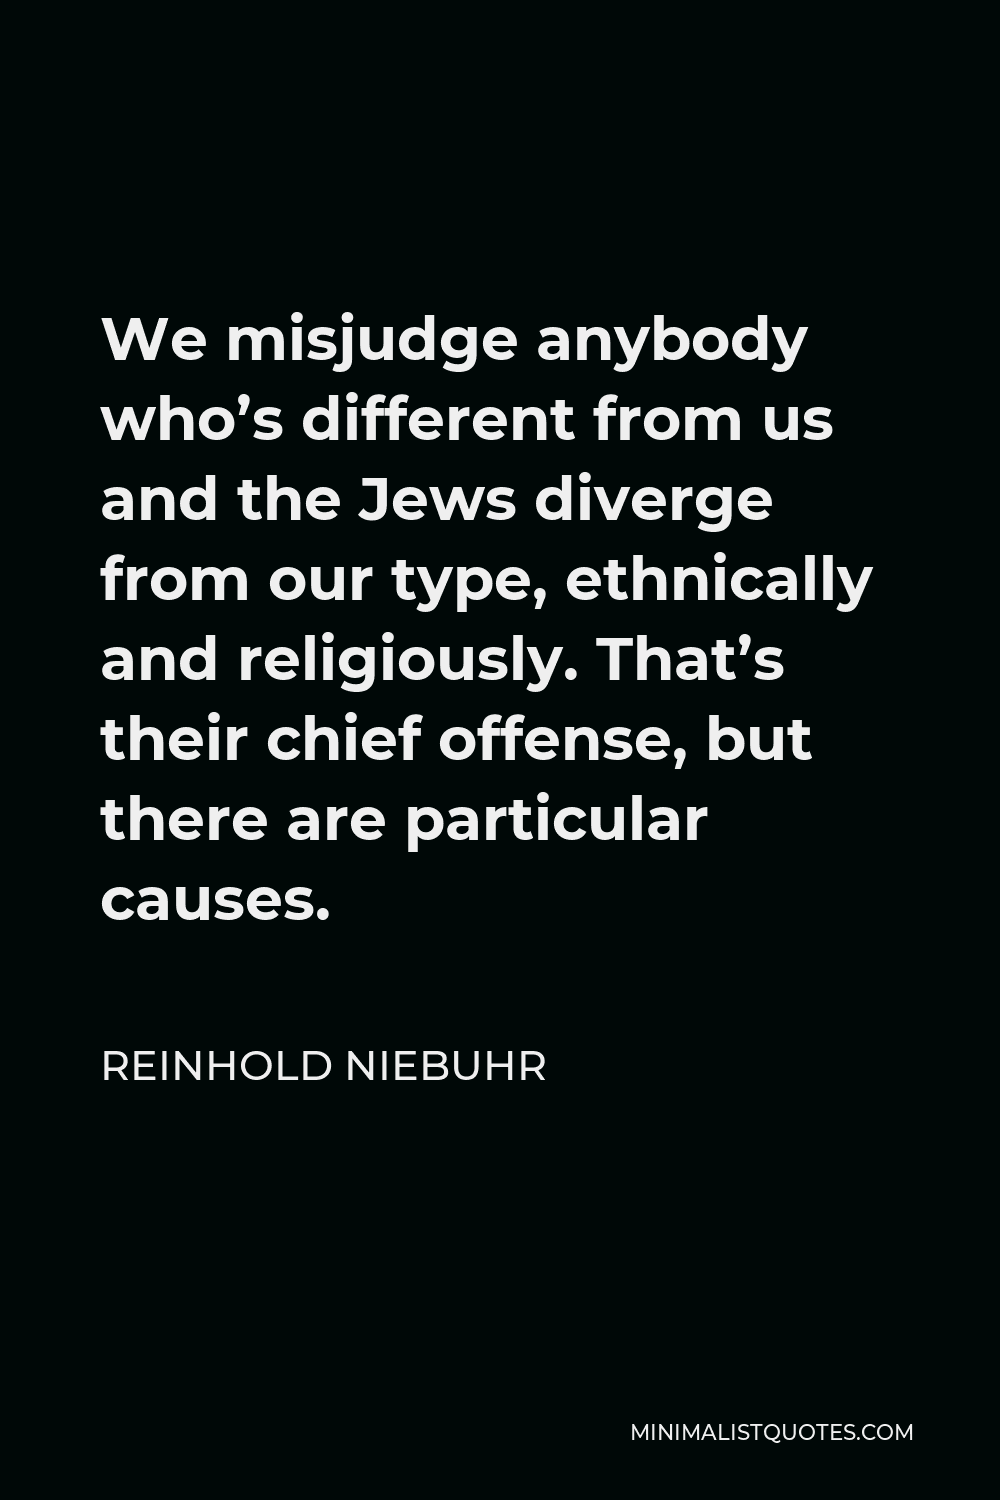 Reinhold Niebuhr Quote - We misjudge anybody who’s different from us and the Jews diverge from our type, ethnically and religiously. That’s their chief offense, but there are particular causes.